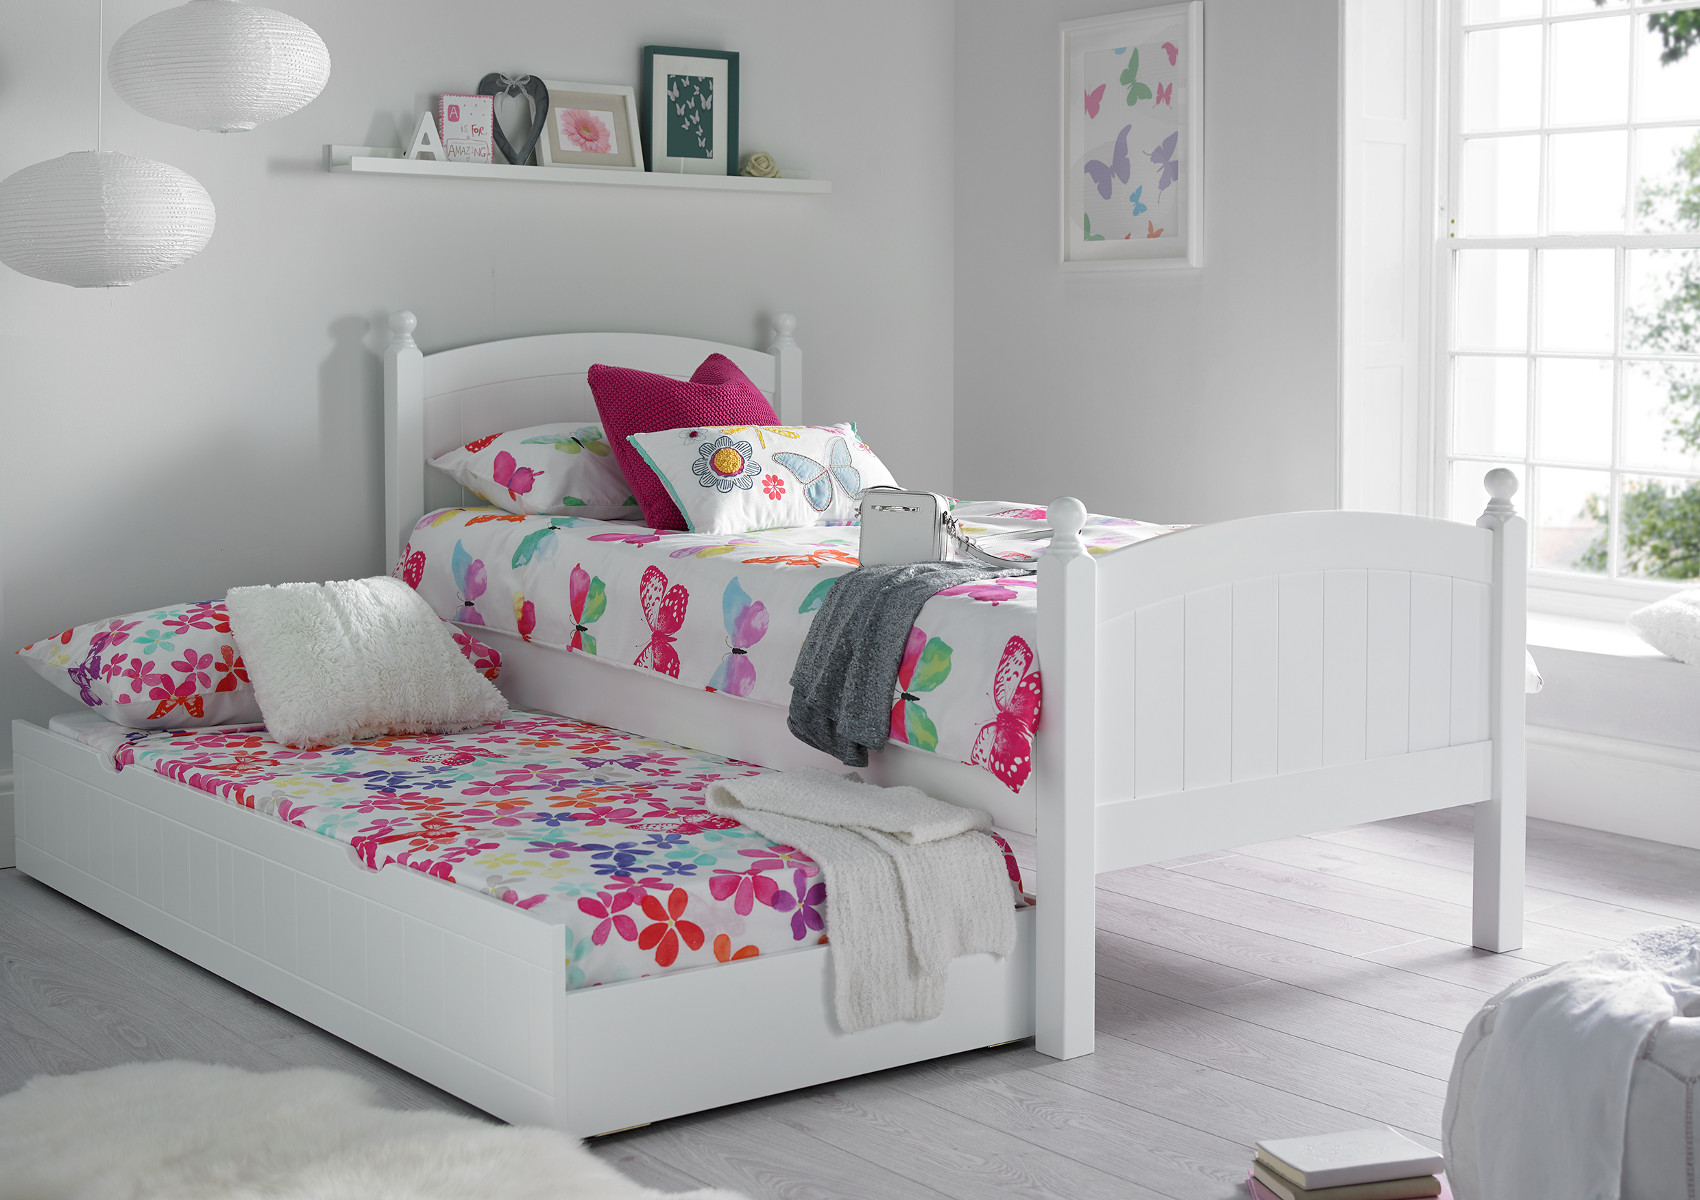 View Charleston White Wooden Single Childrens Bed Time4Sleep information